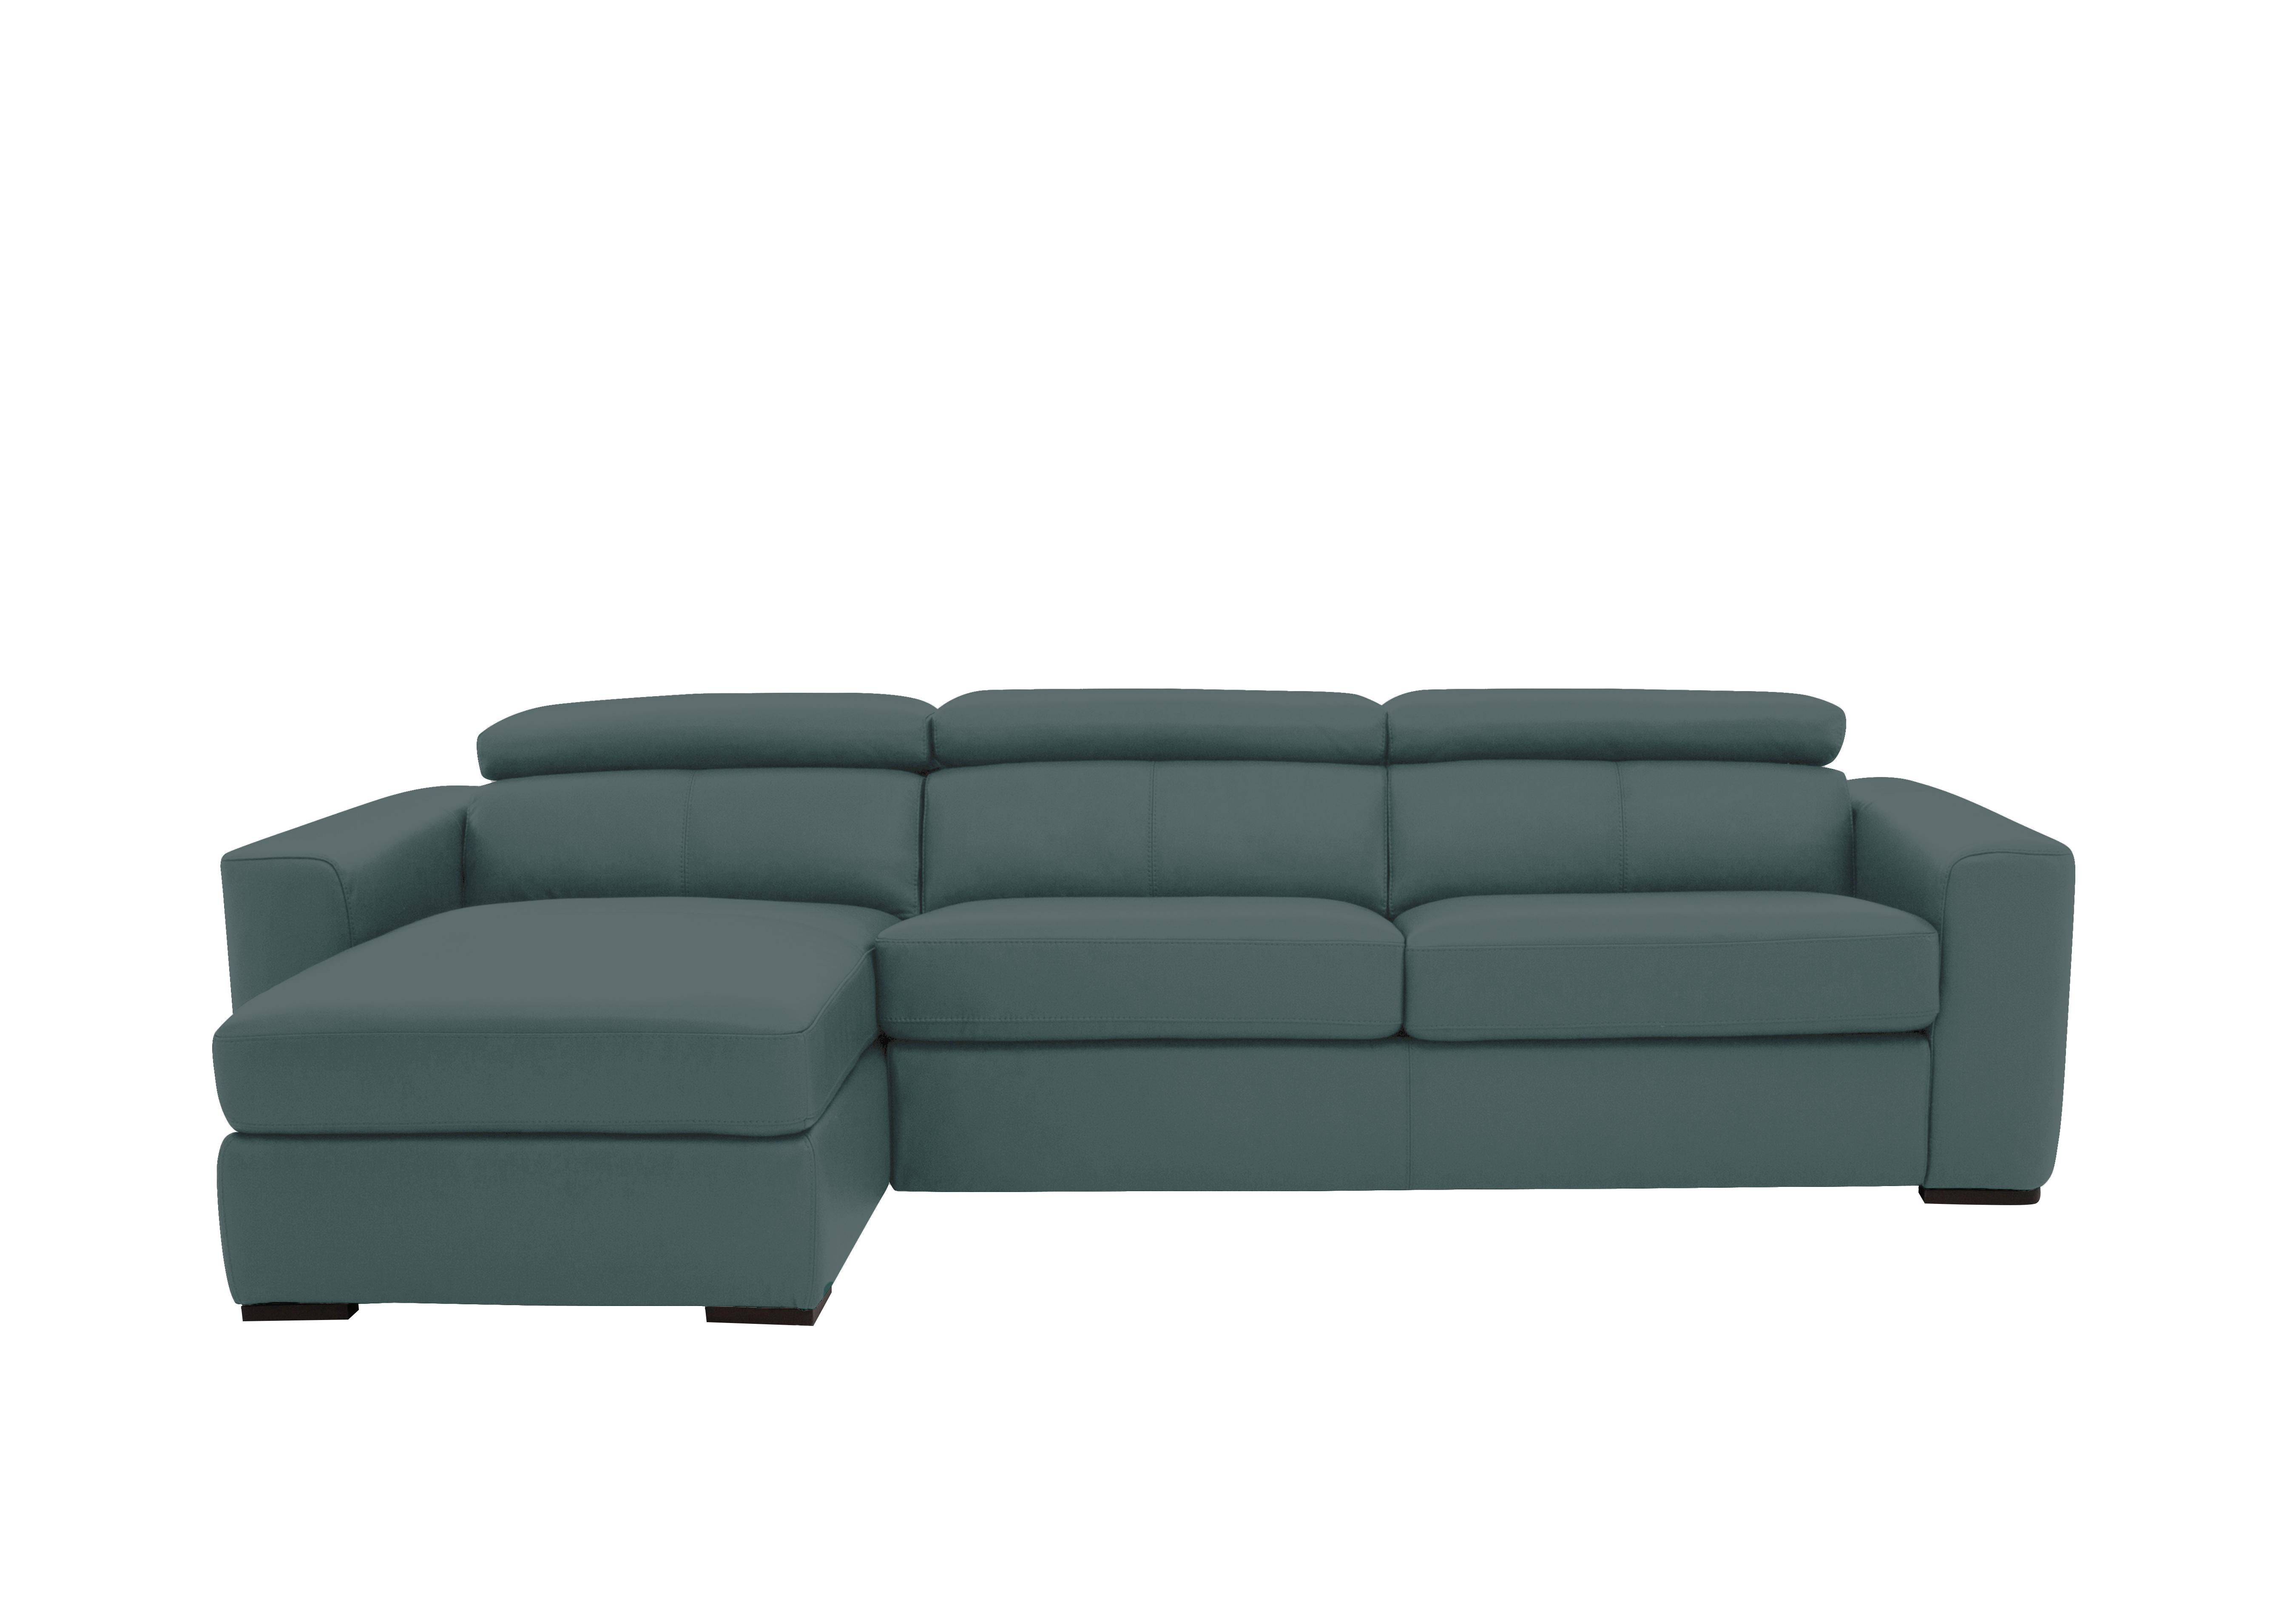 Infinity Leather Corner Chaise Sofabed with Storage in Bv-301e Lake Green on Furniture Village